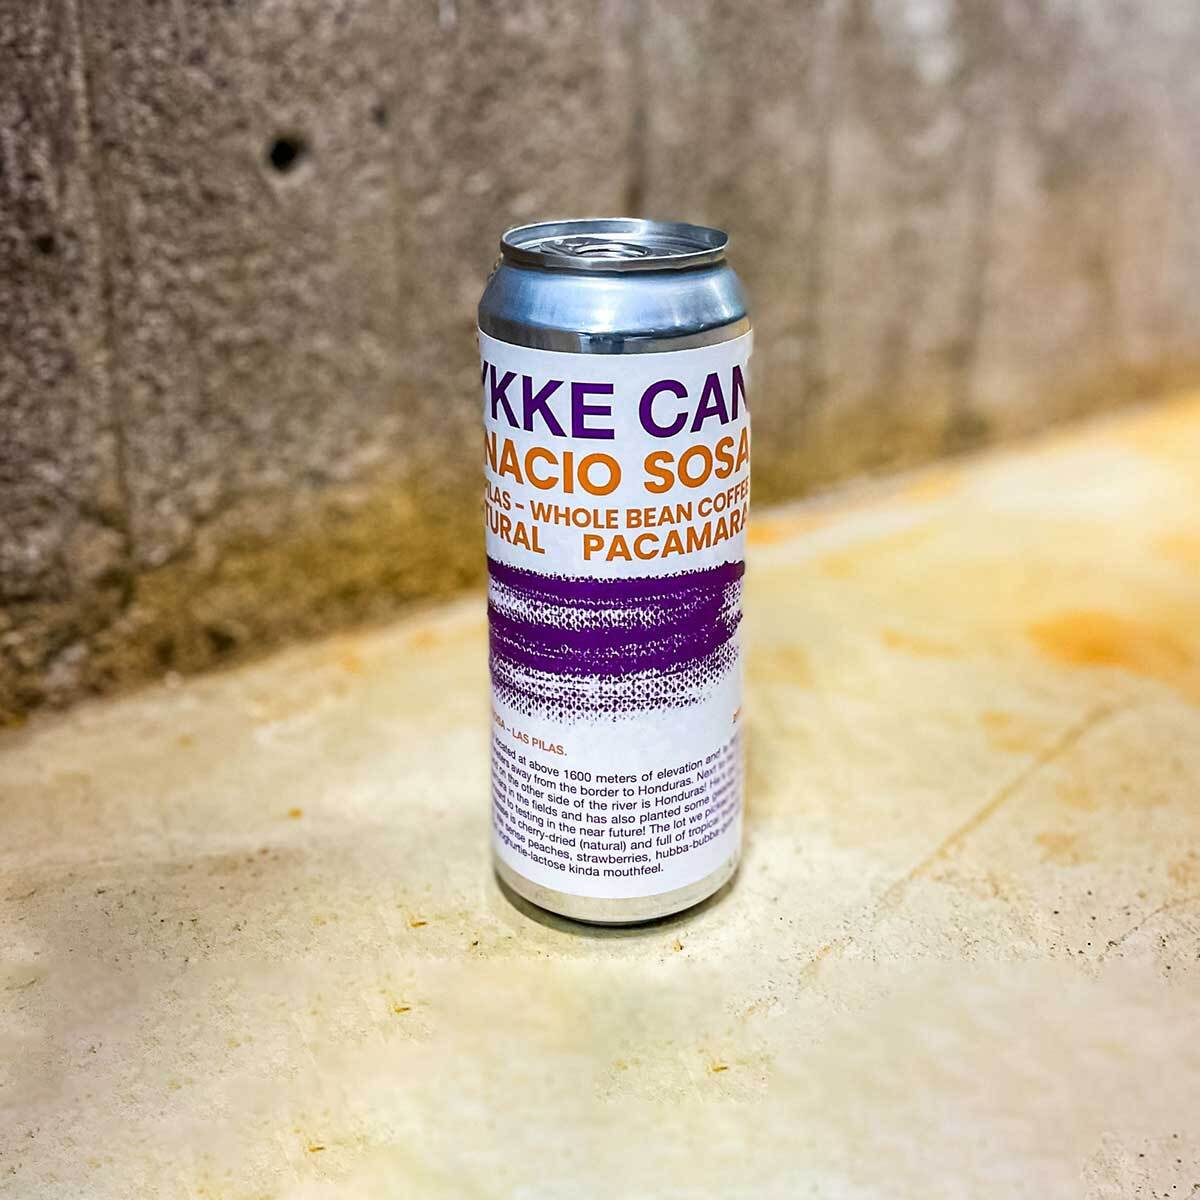 The lot we picked out for this CAN-release is cherry-dried (natural) and full of tropical fruits and sweetness. We sense peaches, strawberries, hubba-bubba-gum with a somewhat 